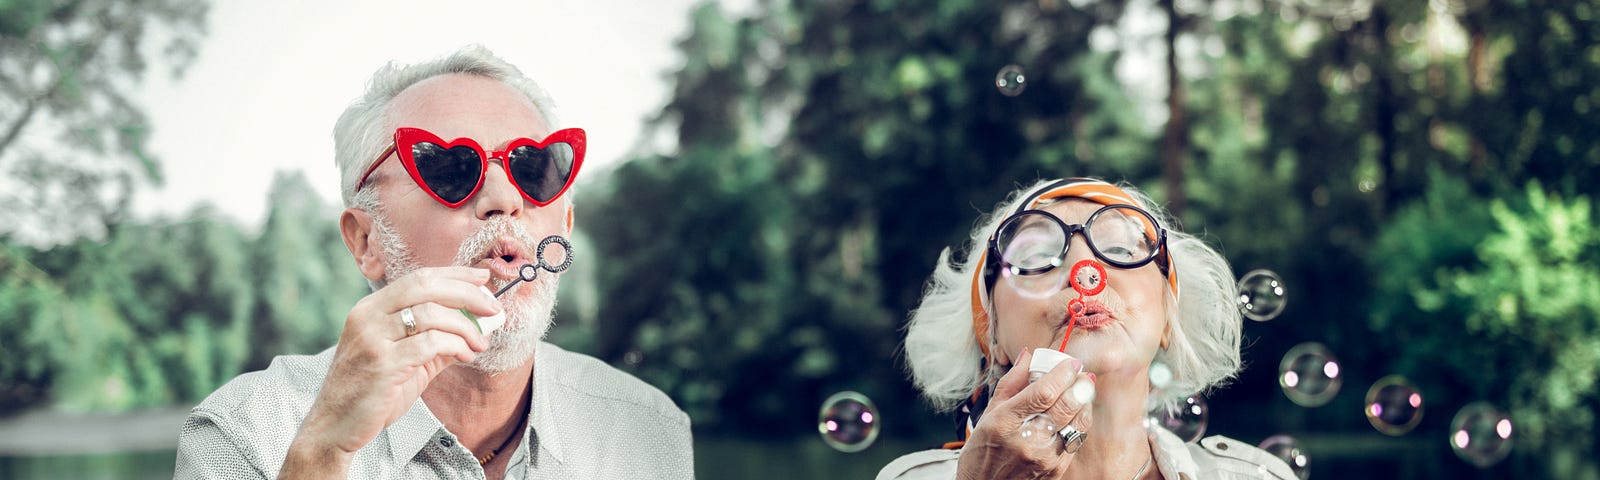 Baby Boomers man and woman couple blowing bubbles. G. K. Hunter